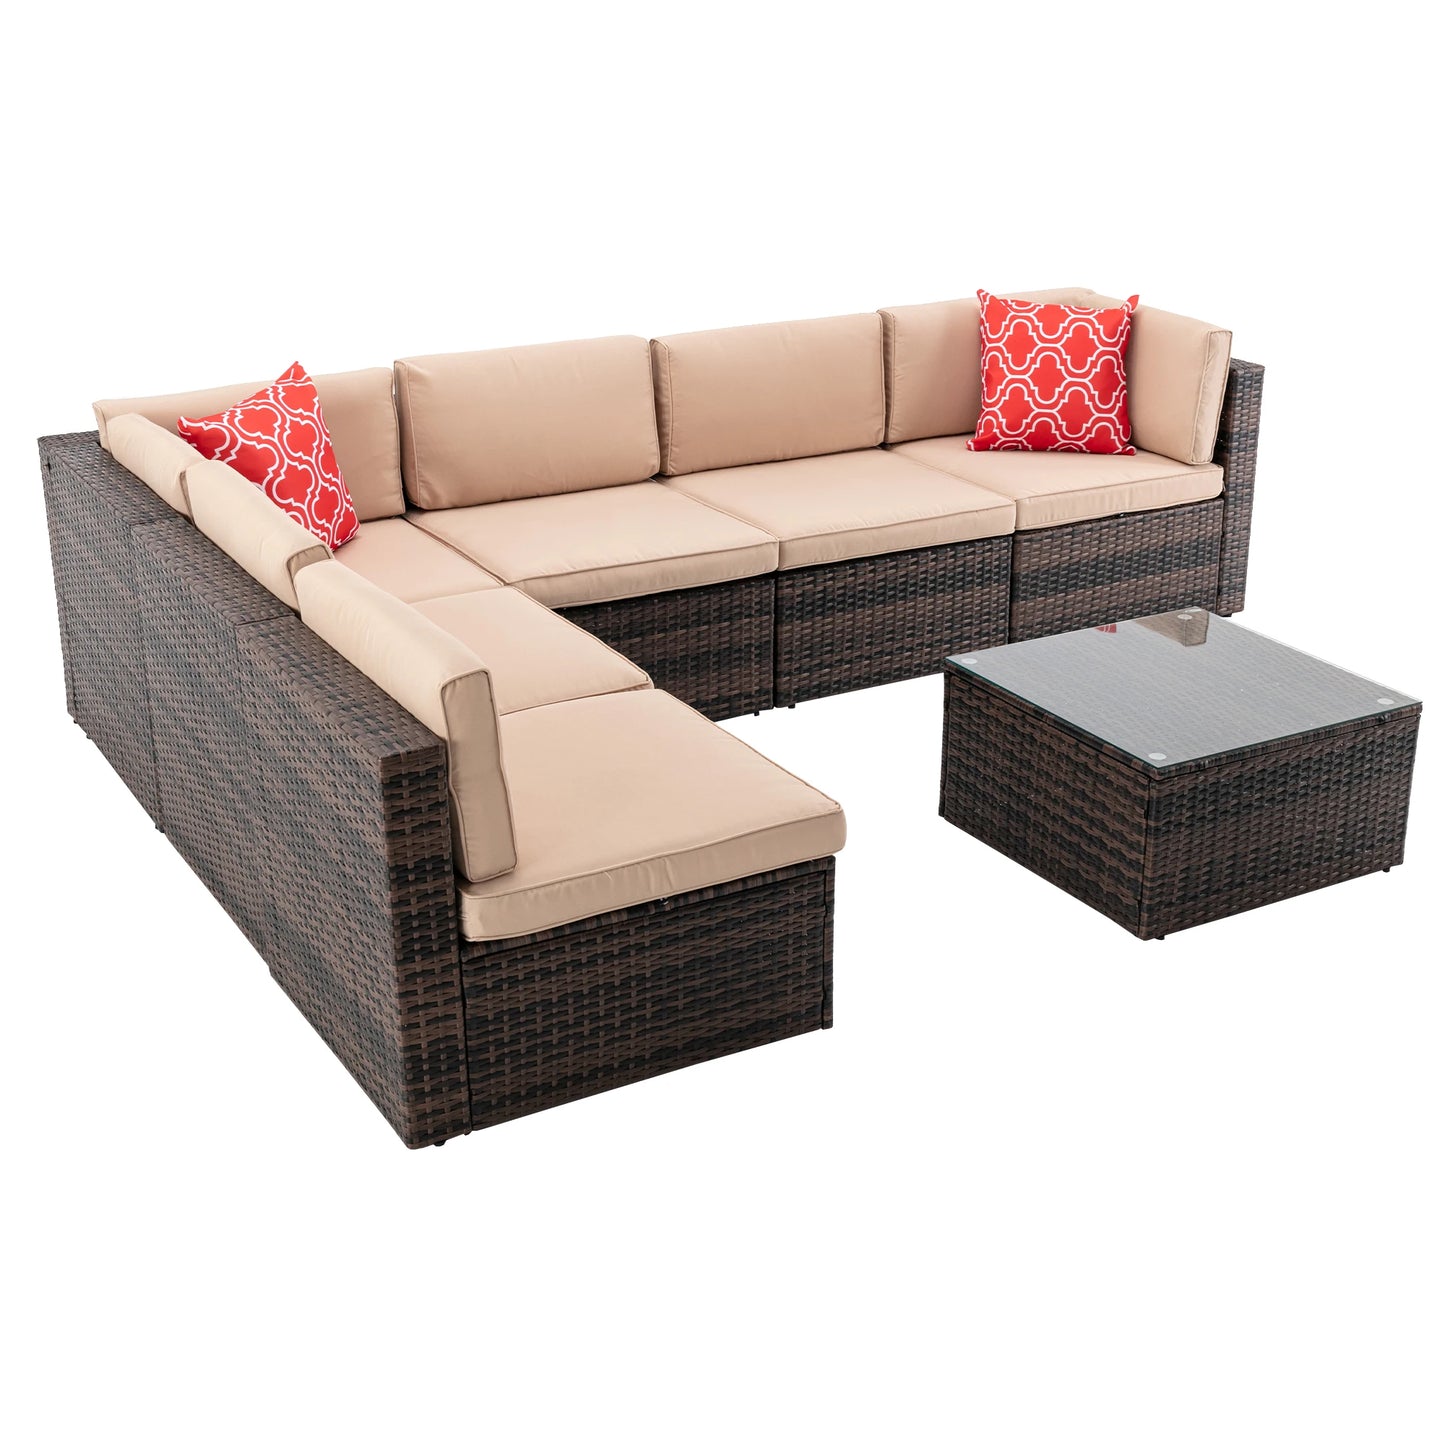 7Pcs Outdoor Patio Furniture Rattan Wicker Sectional Cushioned Sofa Sets with 2 Pillows